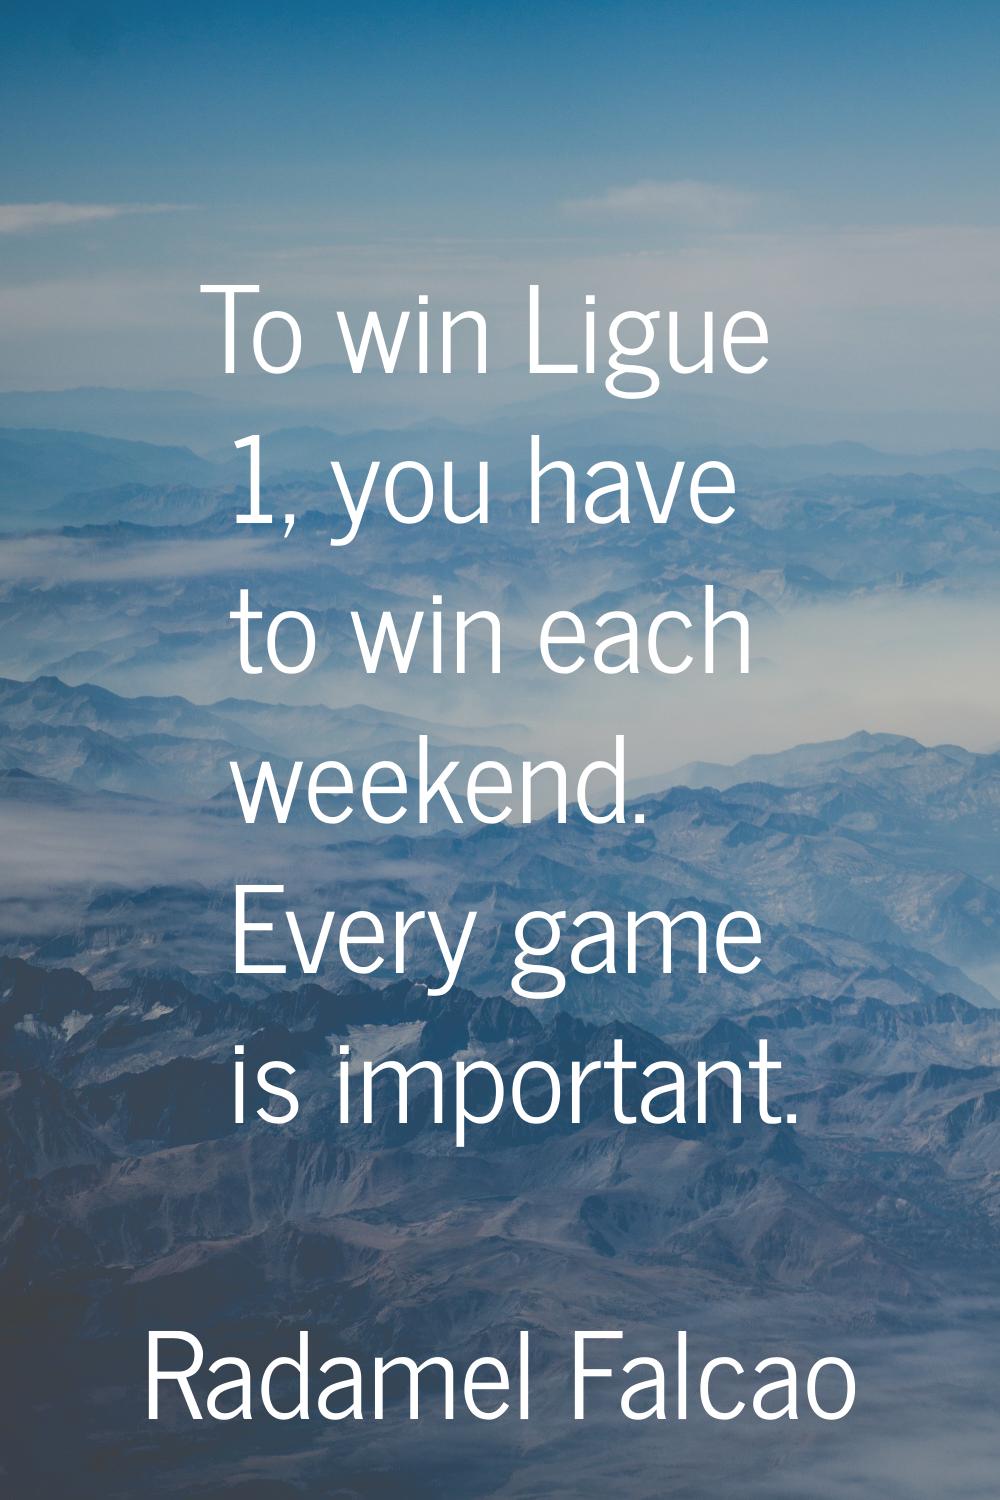 To win Ligue 1, you have to win each weekend. Every game is important.